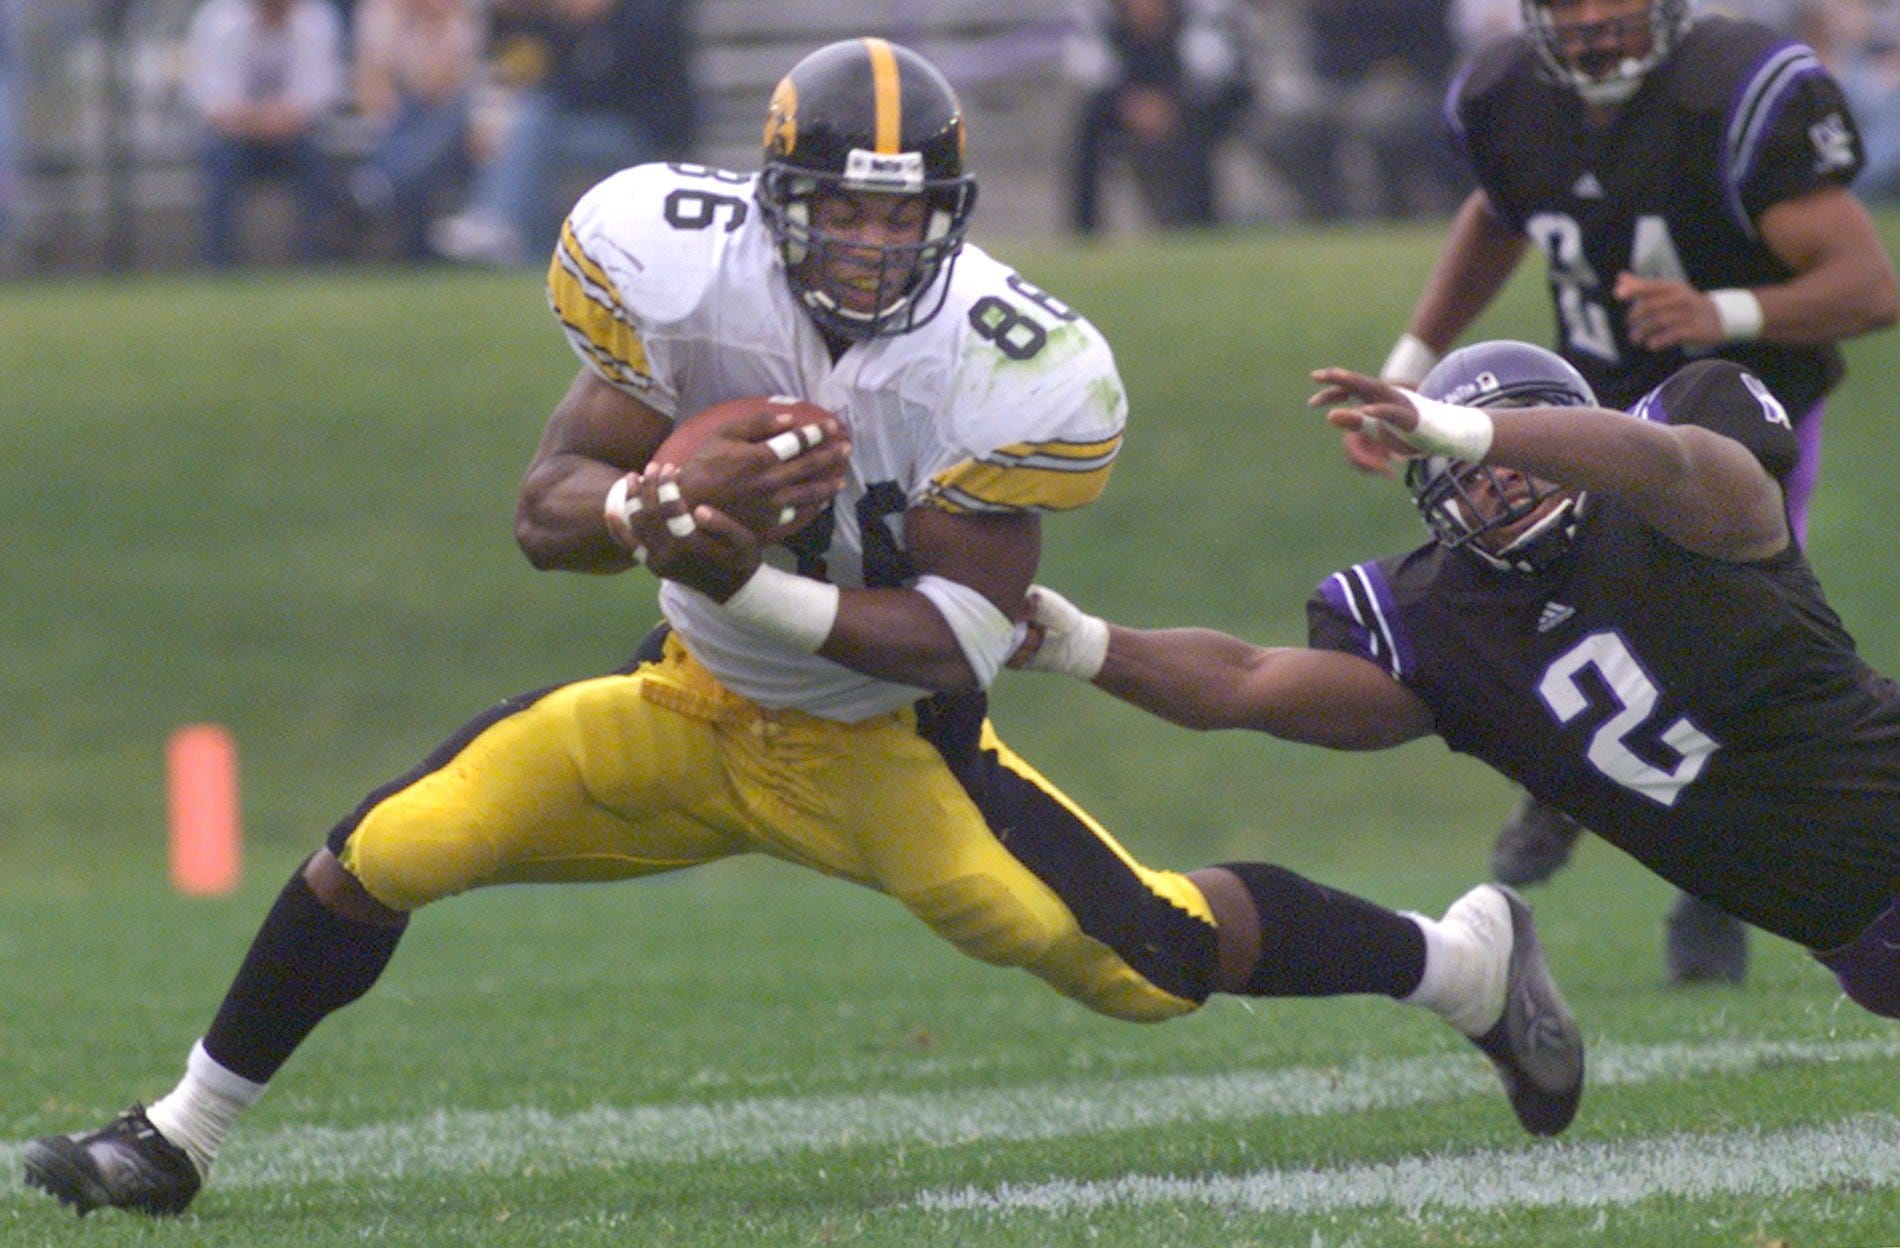 From 1999: Iowa tight end Austin Wheatley catches a pass from Randy Reiners while Kevin Bentley defends for Northwestern.